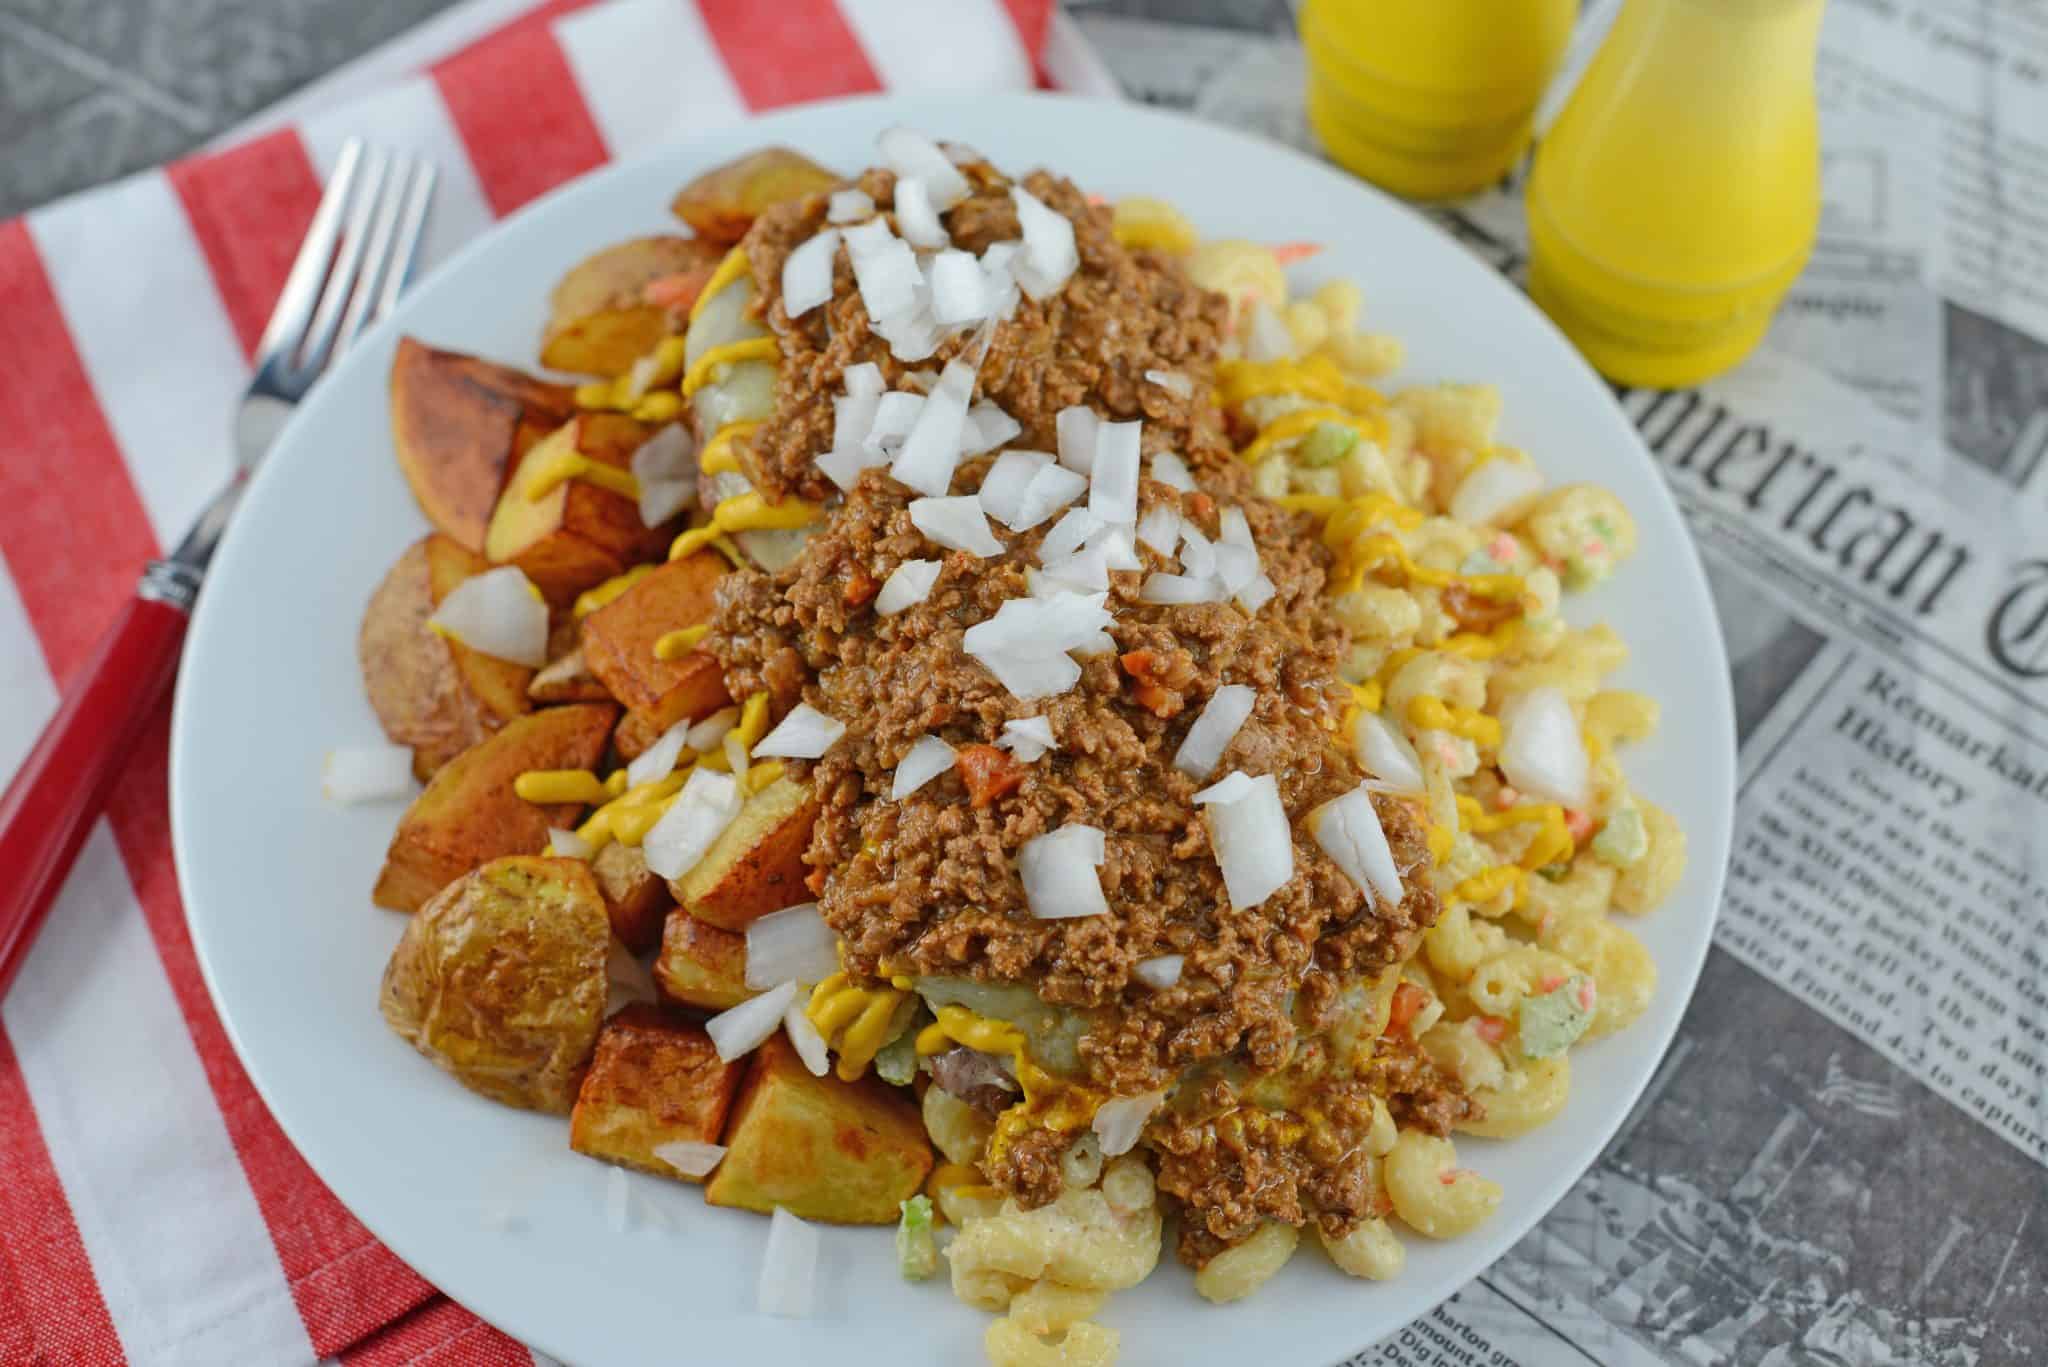 A Garbage Plate loaded with chili and macaroni salad